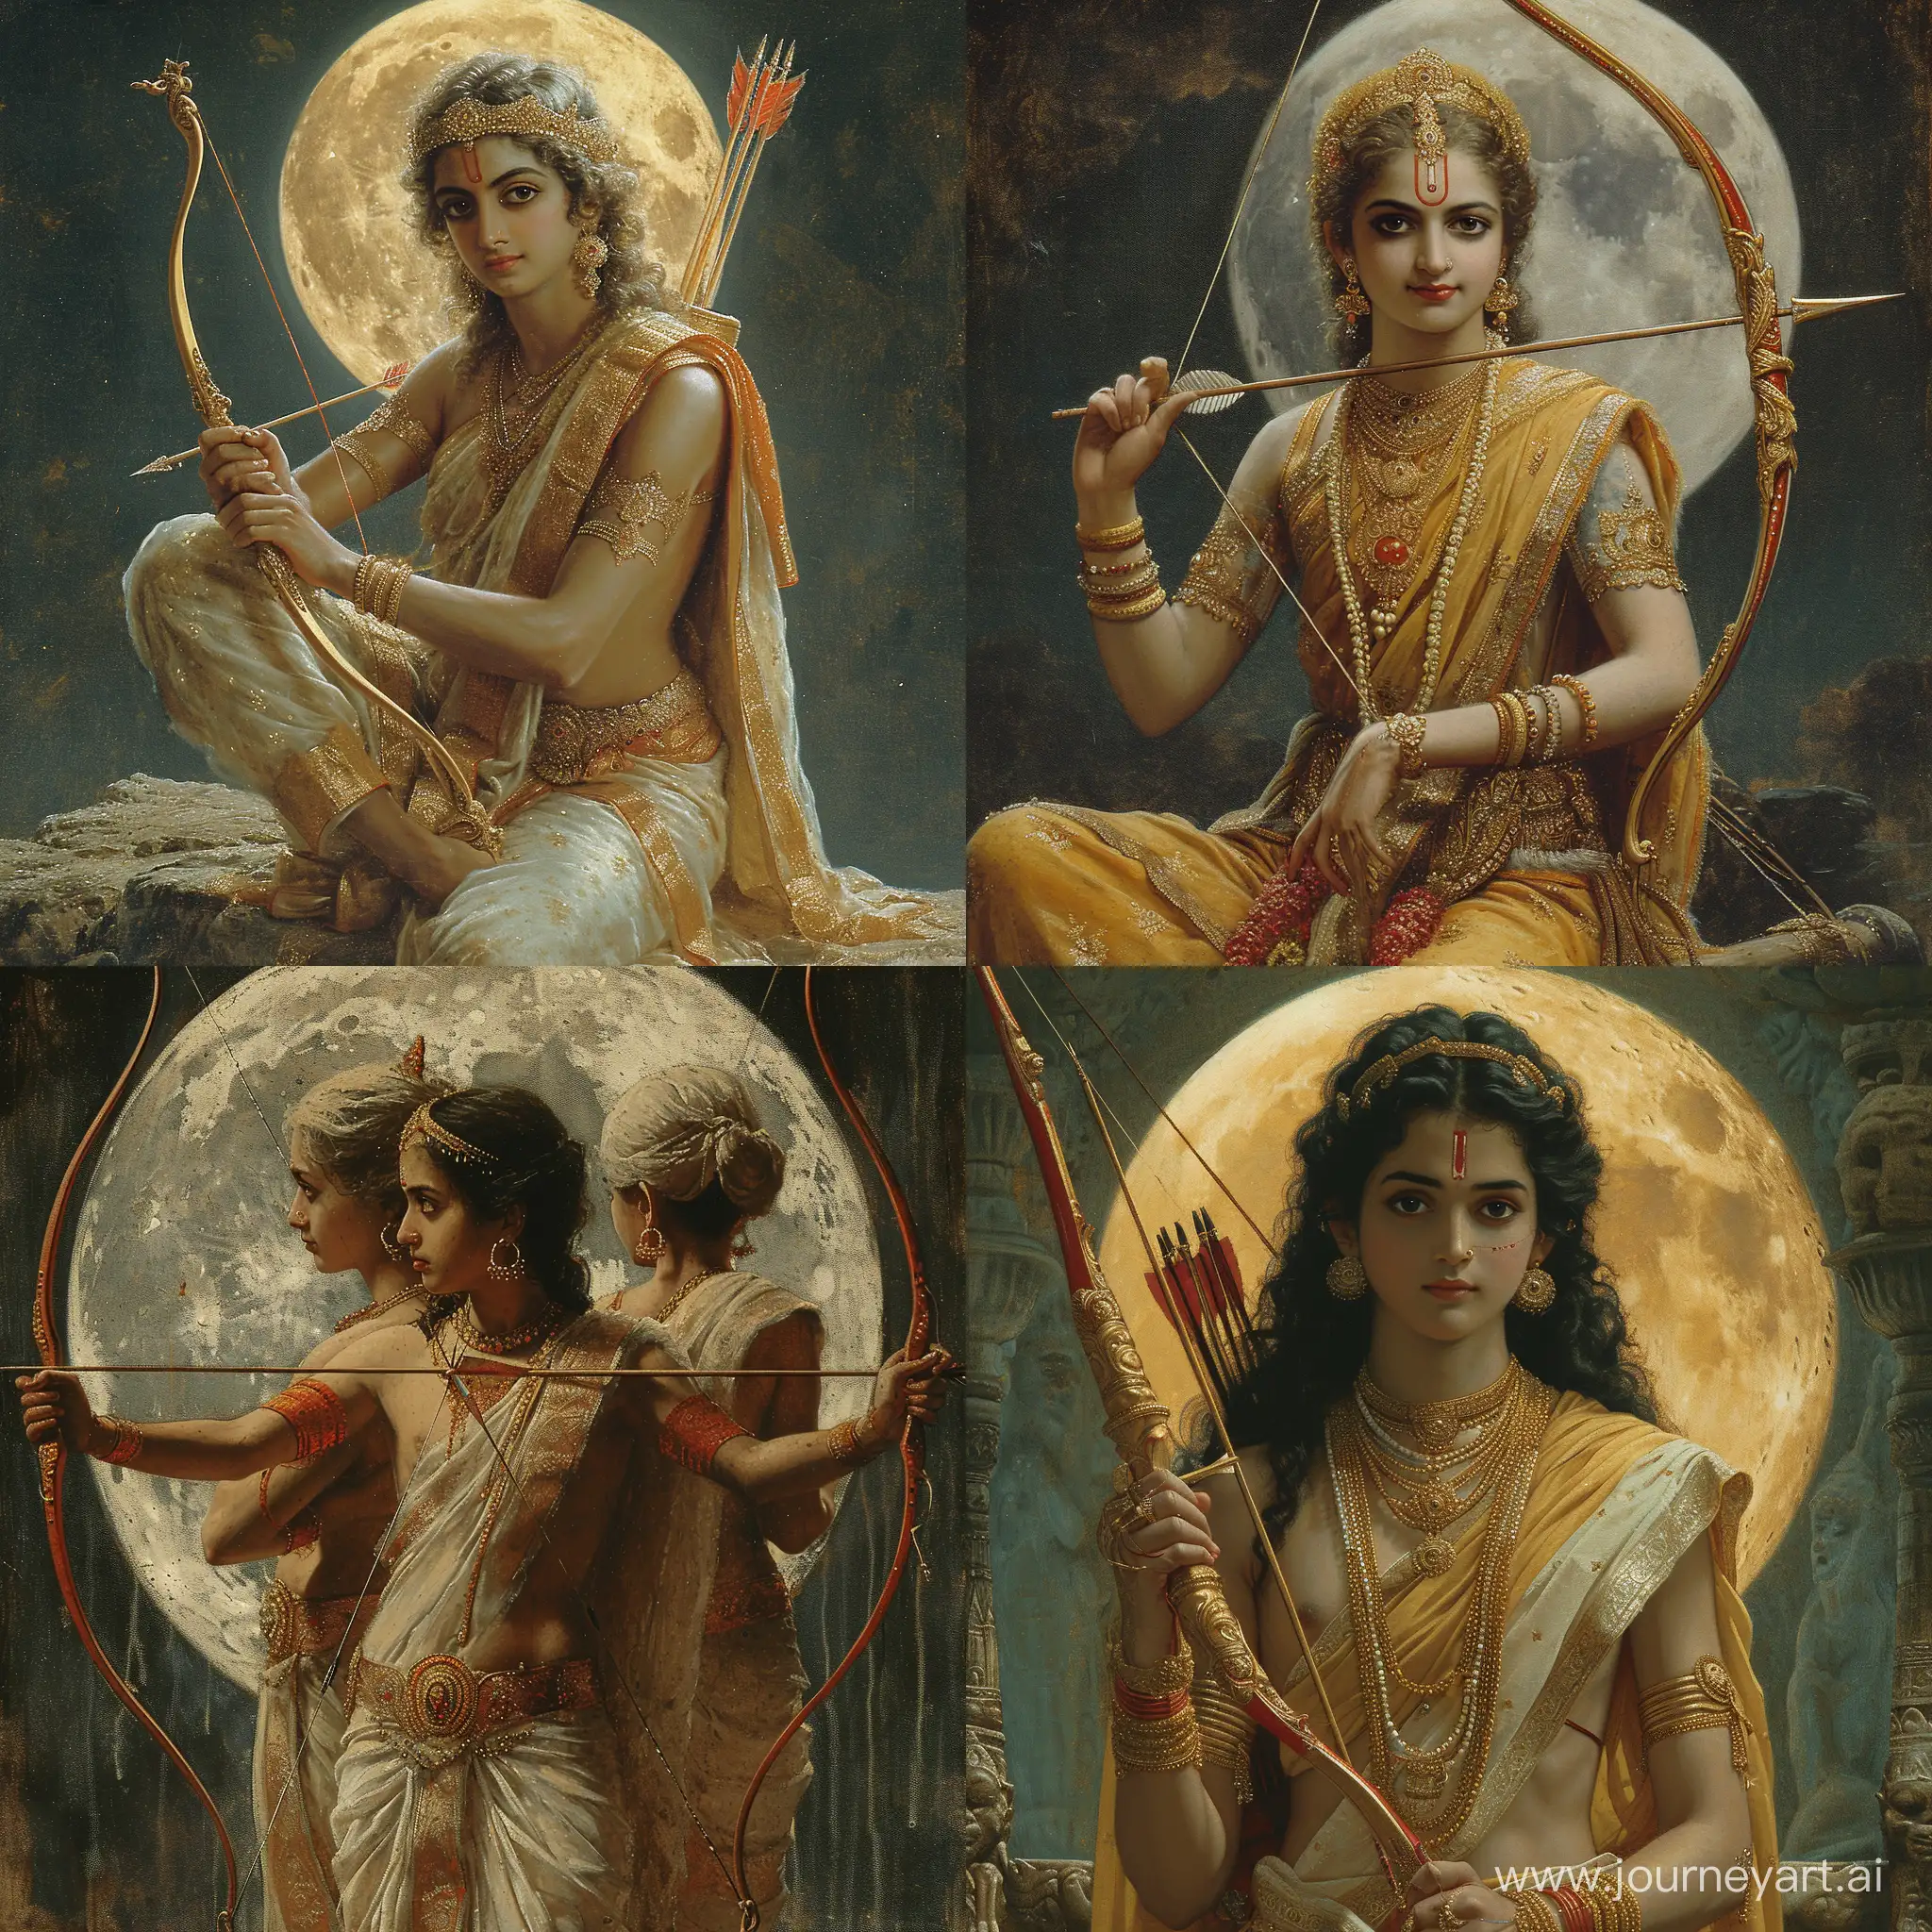 Graceful-Lord-Ram-with-Bow-and-Arrow-Under-Moonlight-Canvas-Painting